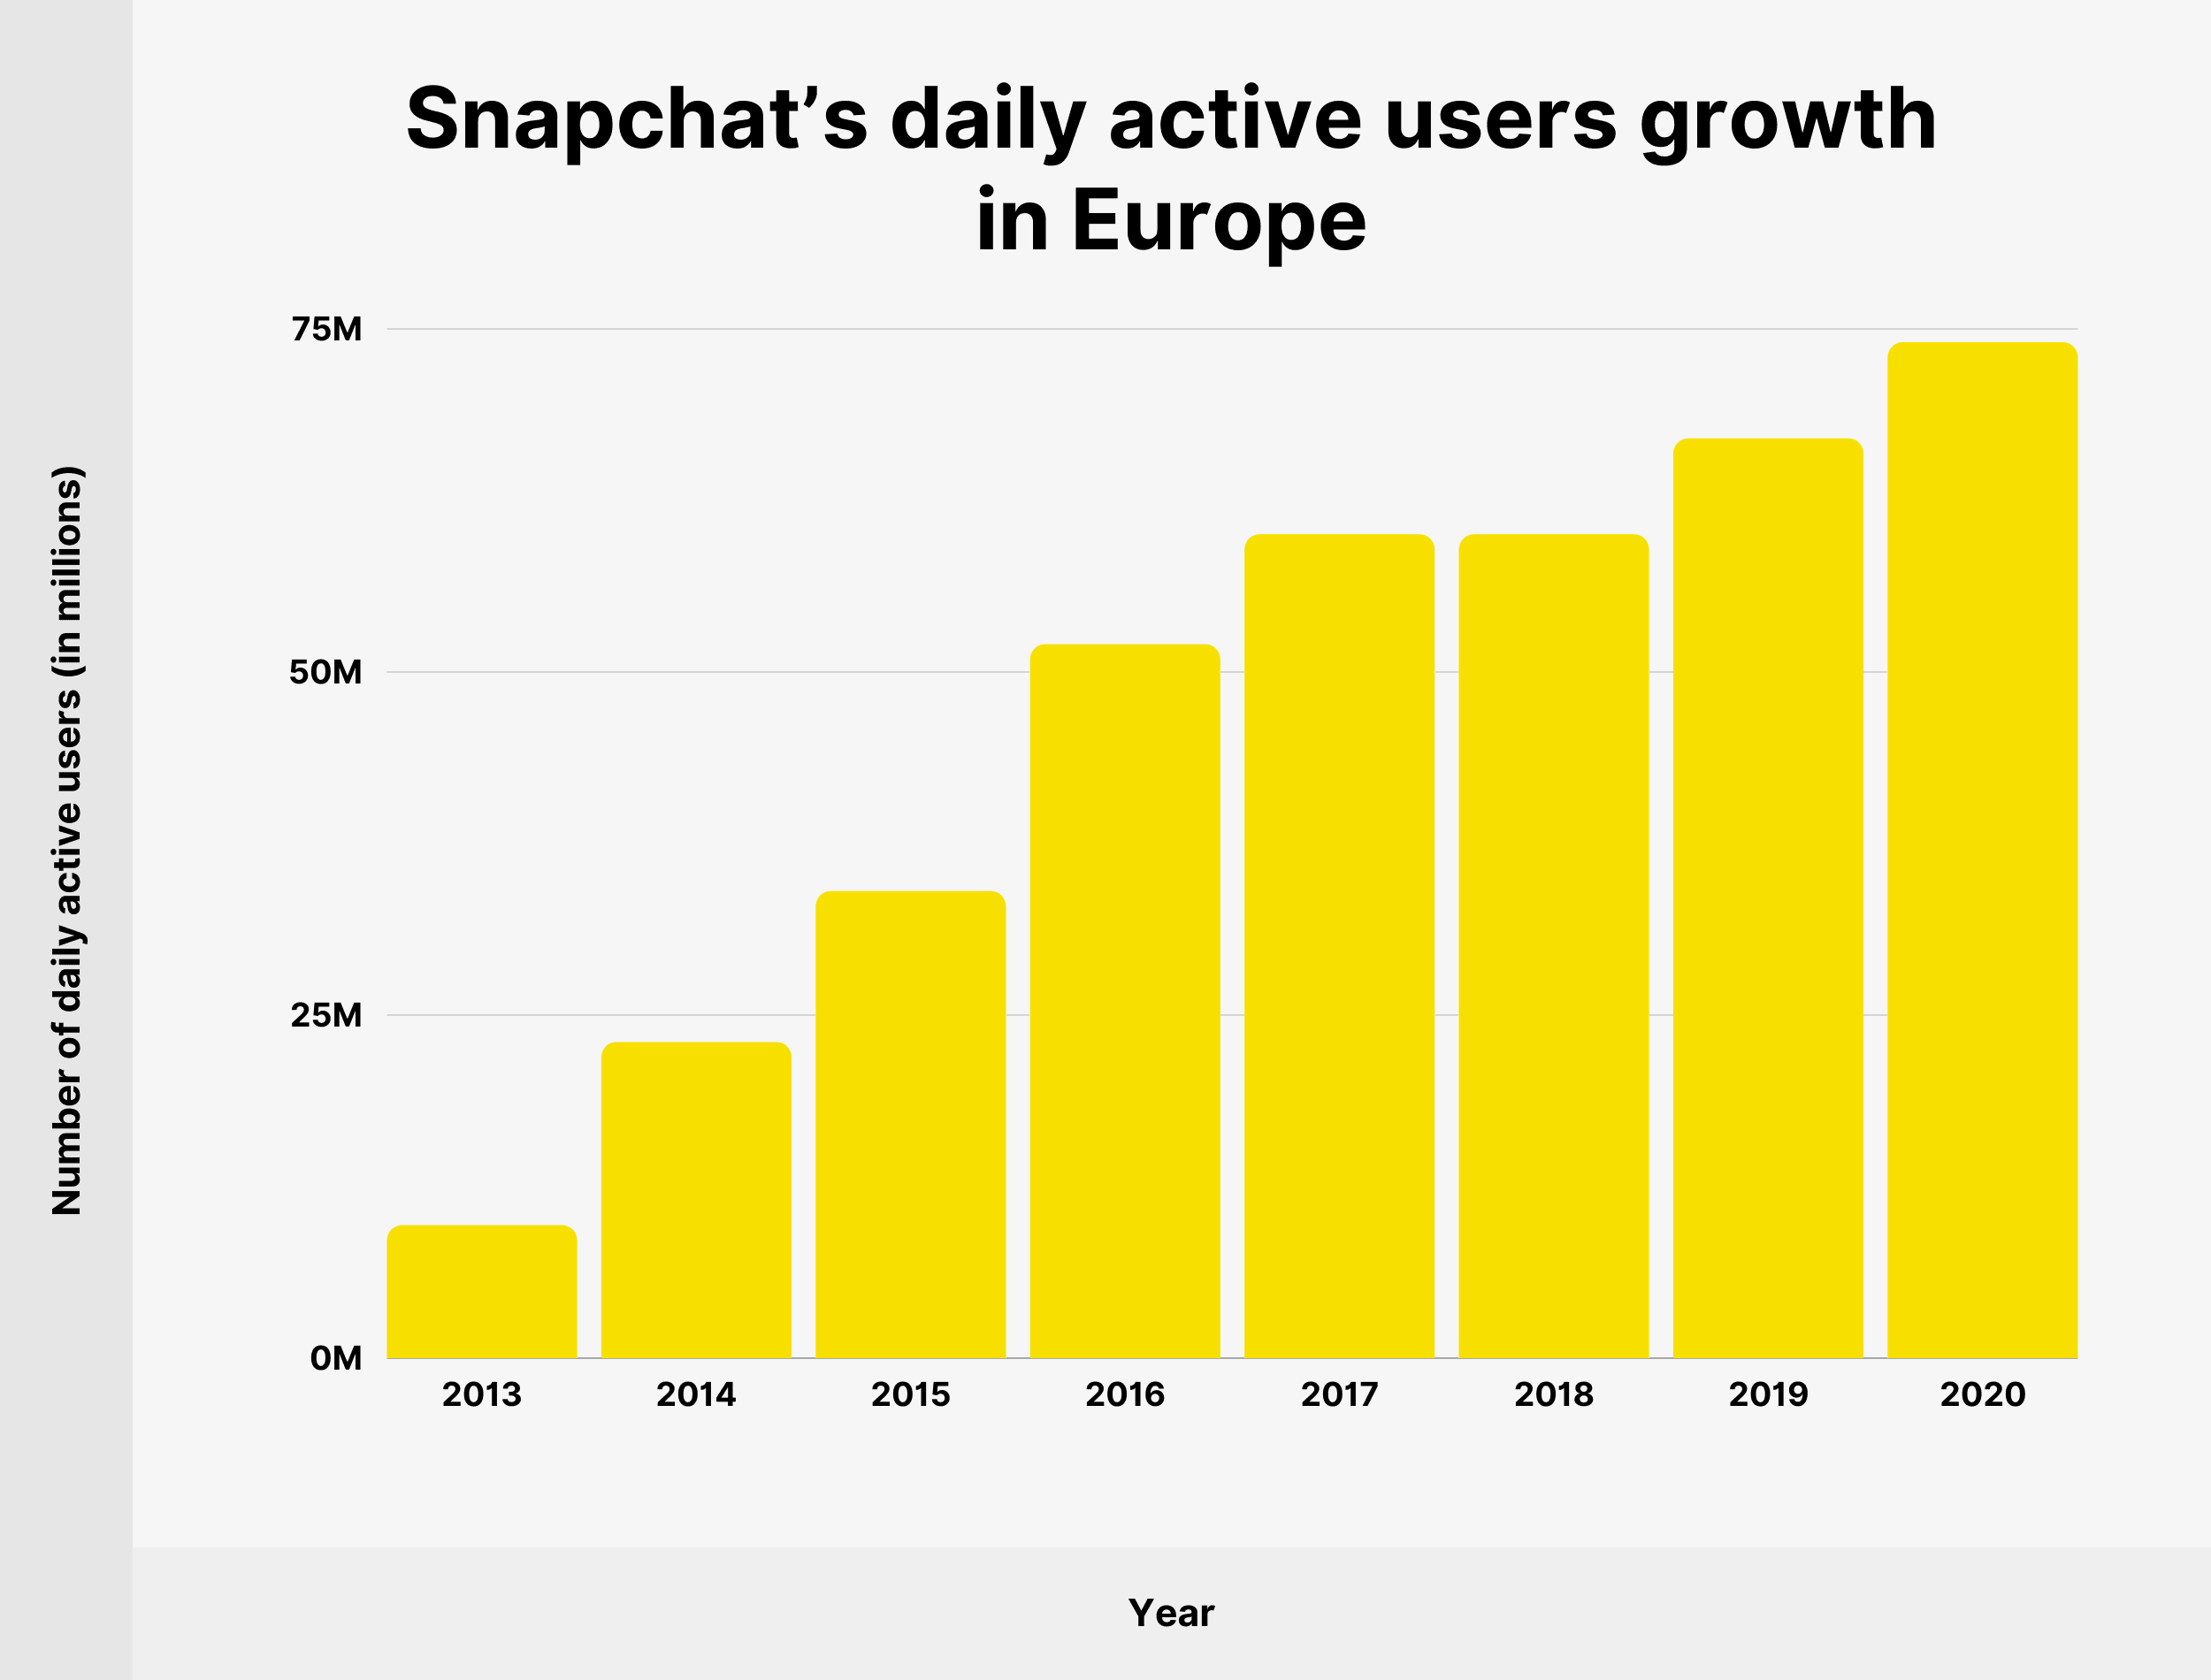 Snapchat’s daily active users growth in Europe